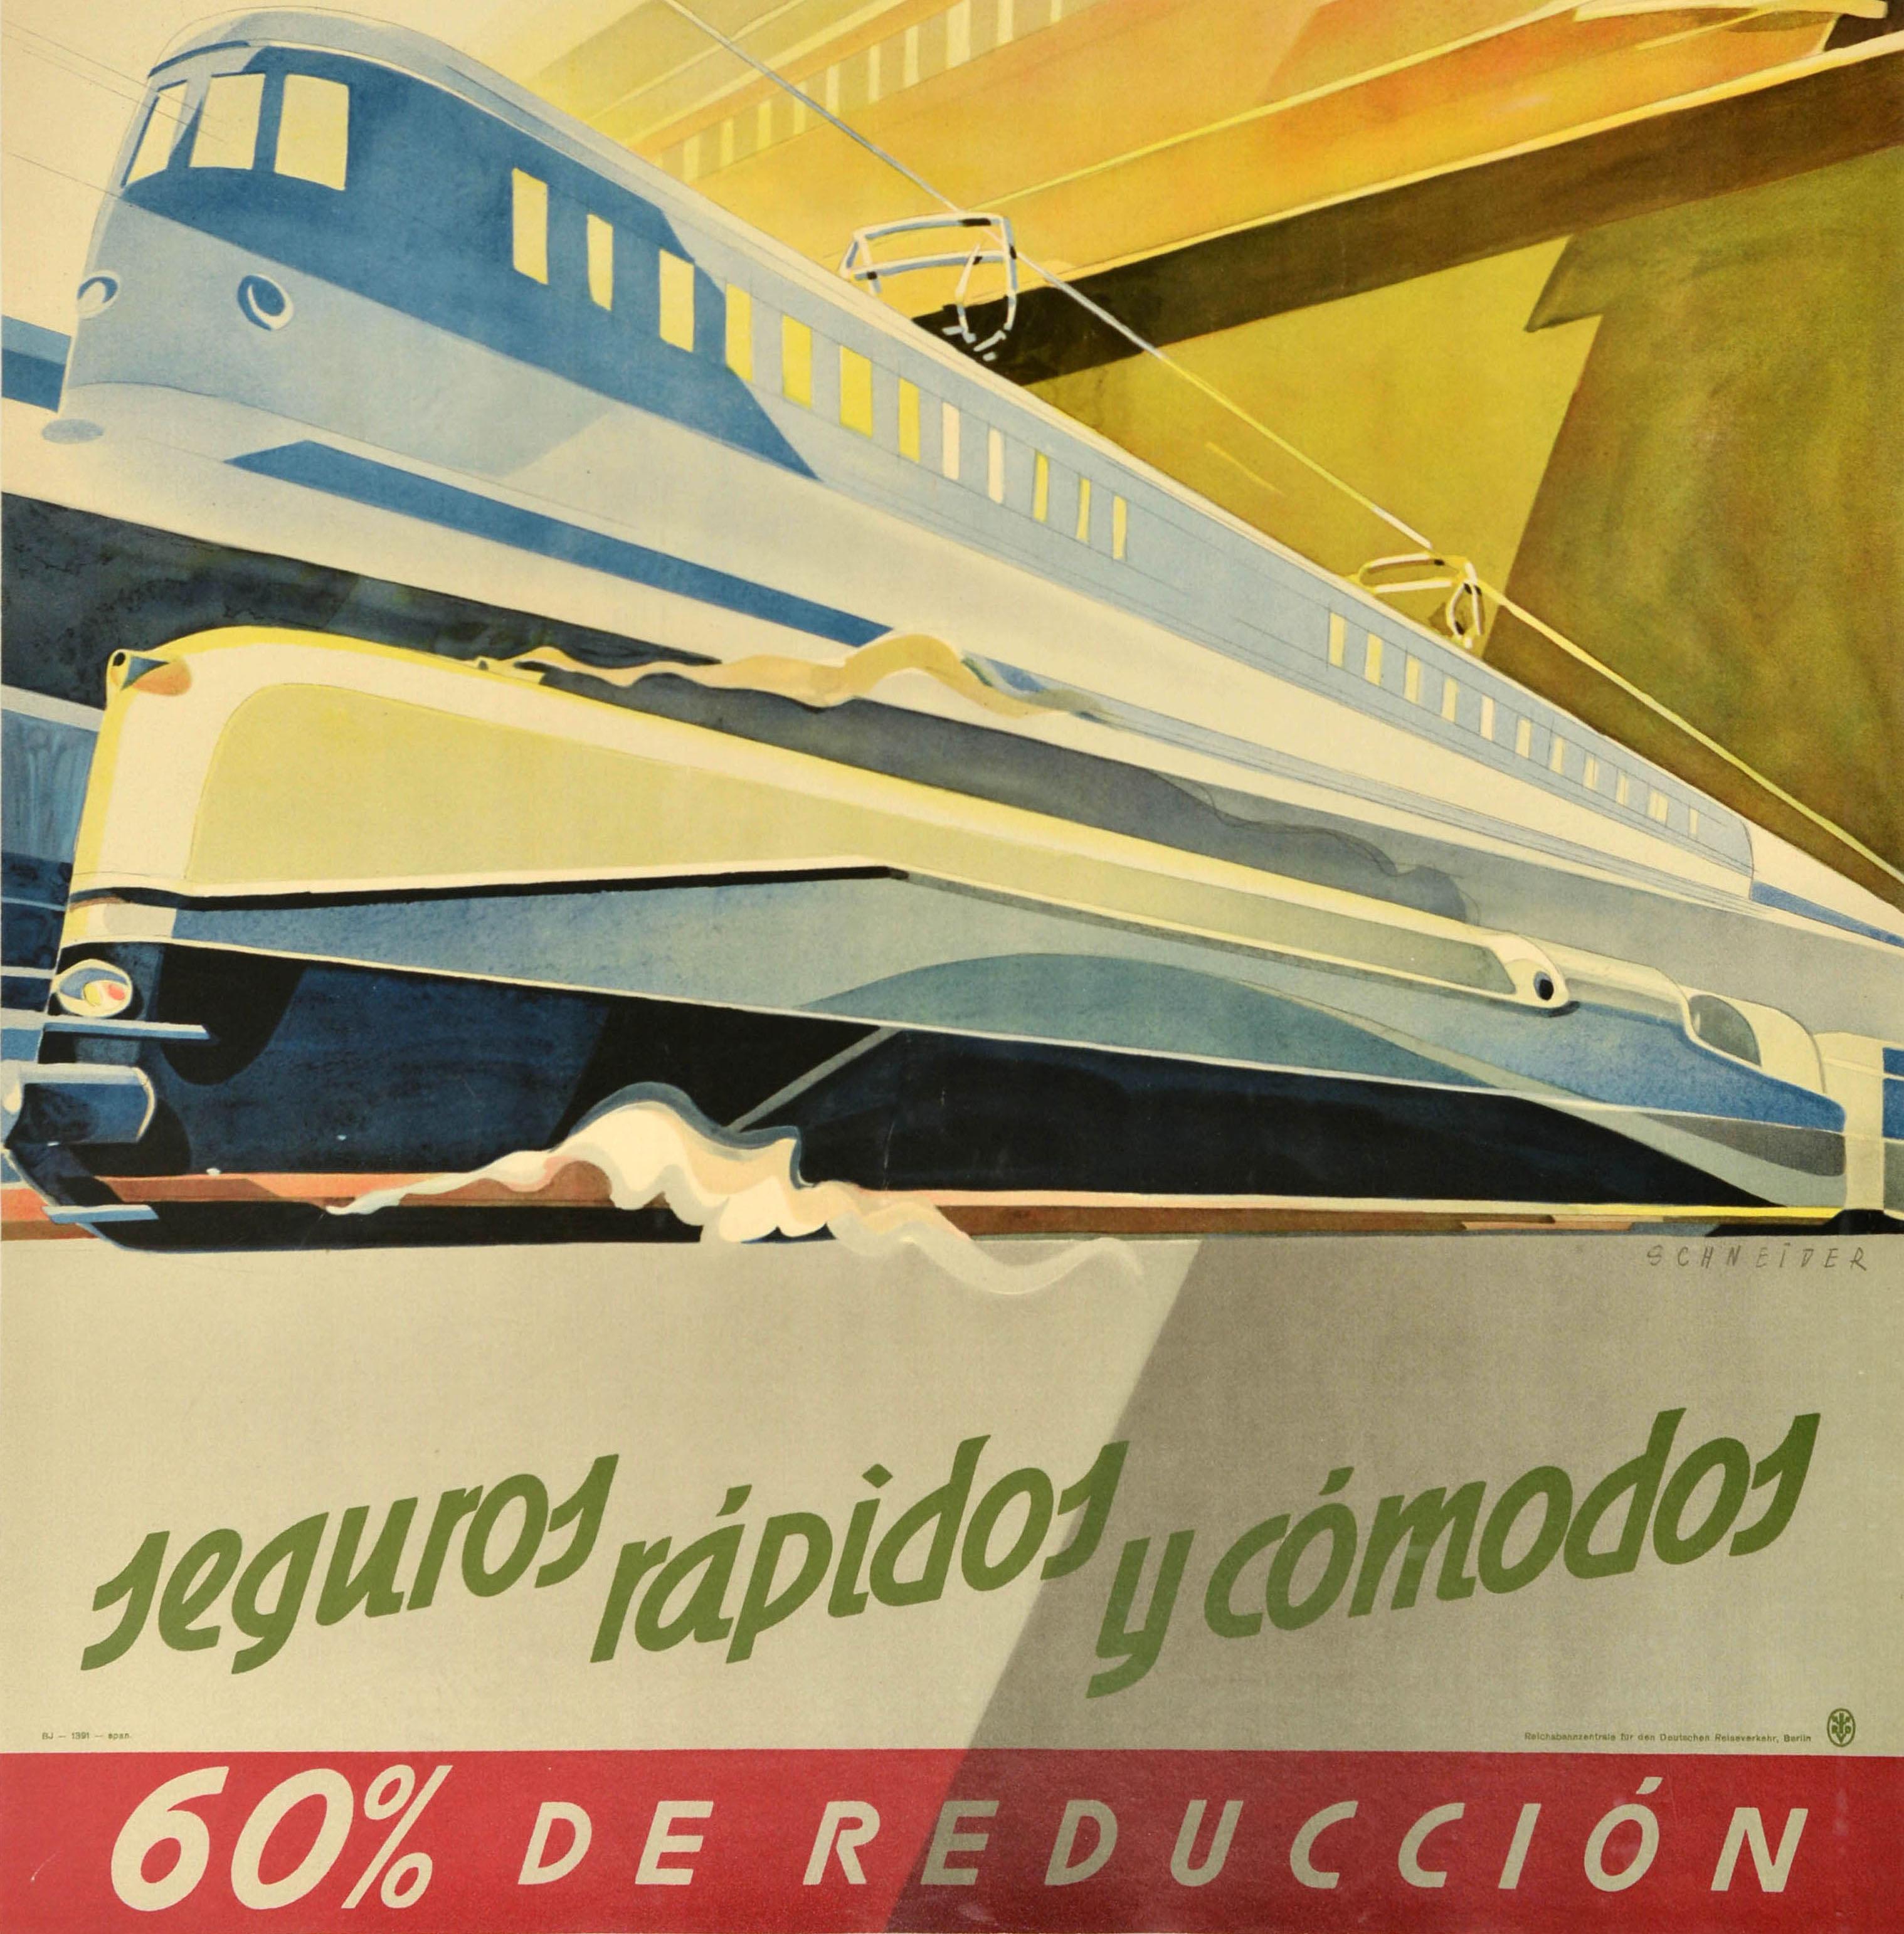 Original vintage travel advertising poster - German Railways Safe Fast and Comfortable / Los Ferrocarriles Alemanes Seguros Rapidos y Comodos - featuring a great Art Deco illustration of different trains speeding to the left and right including a